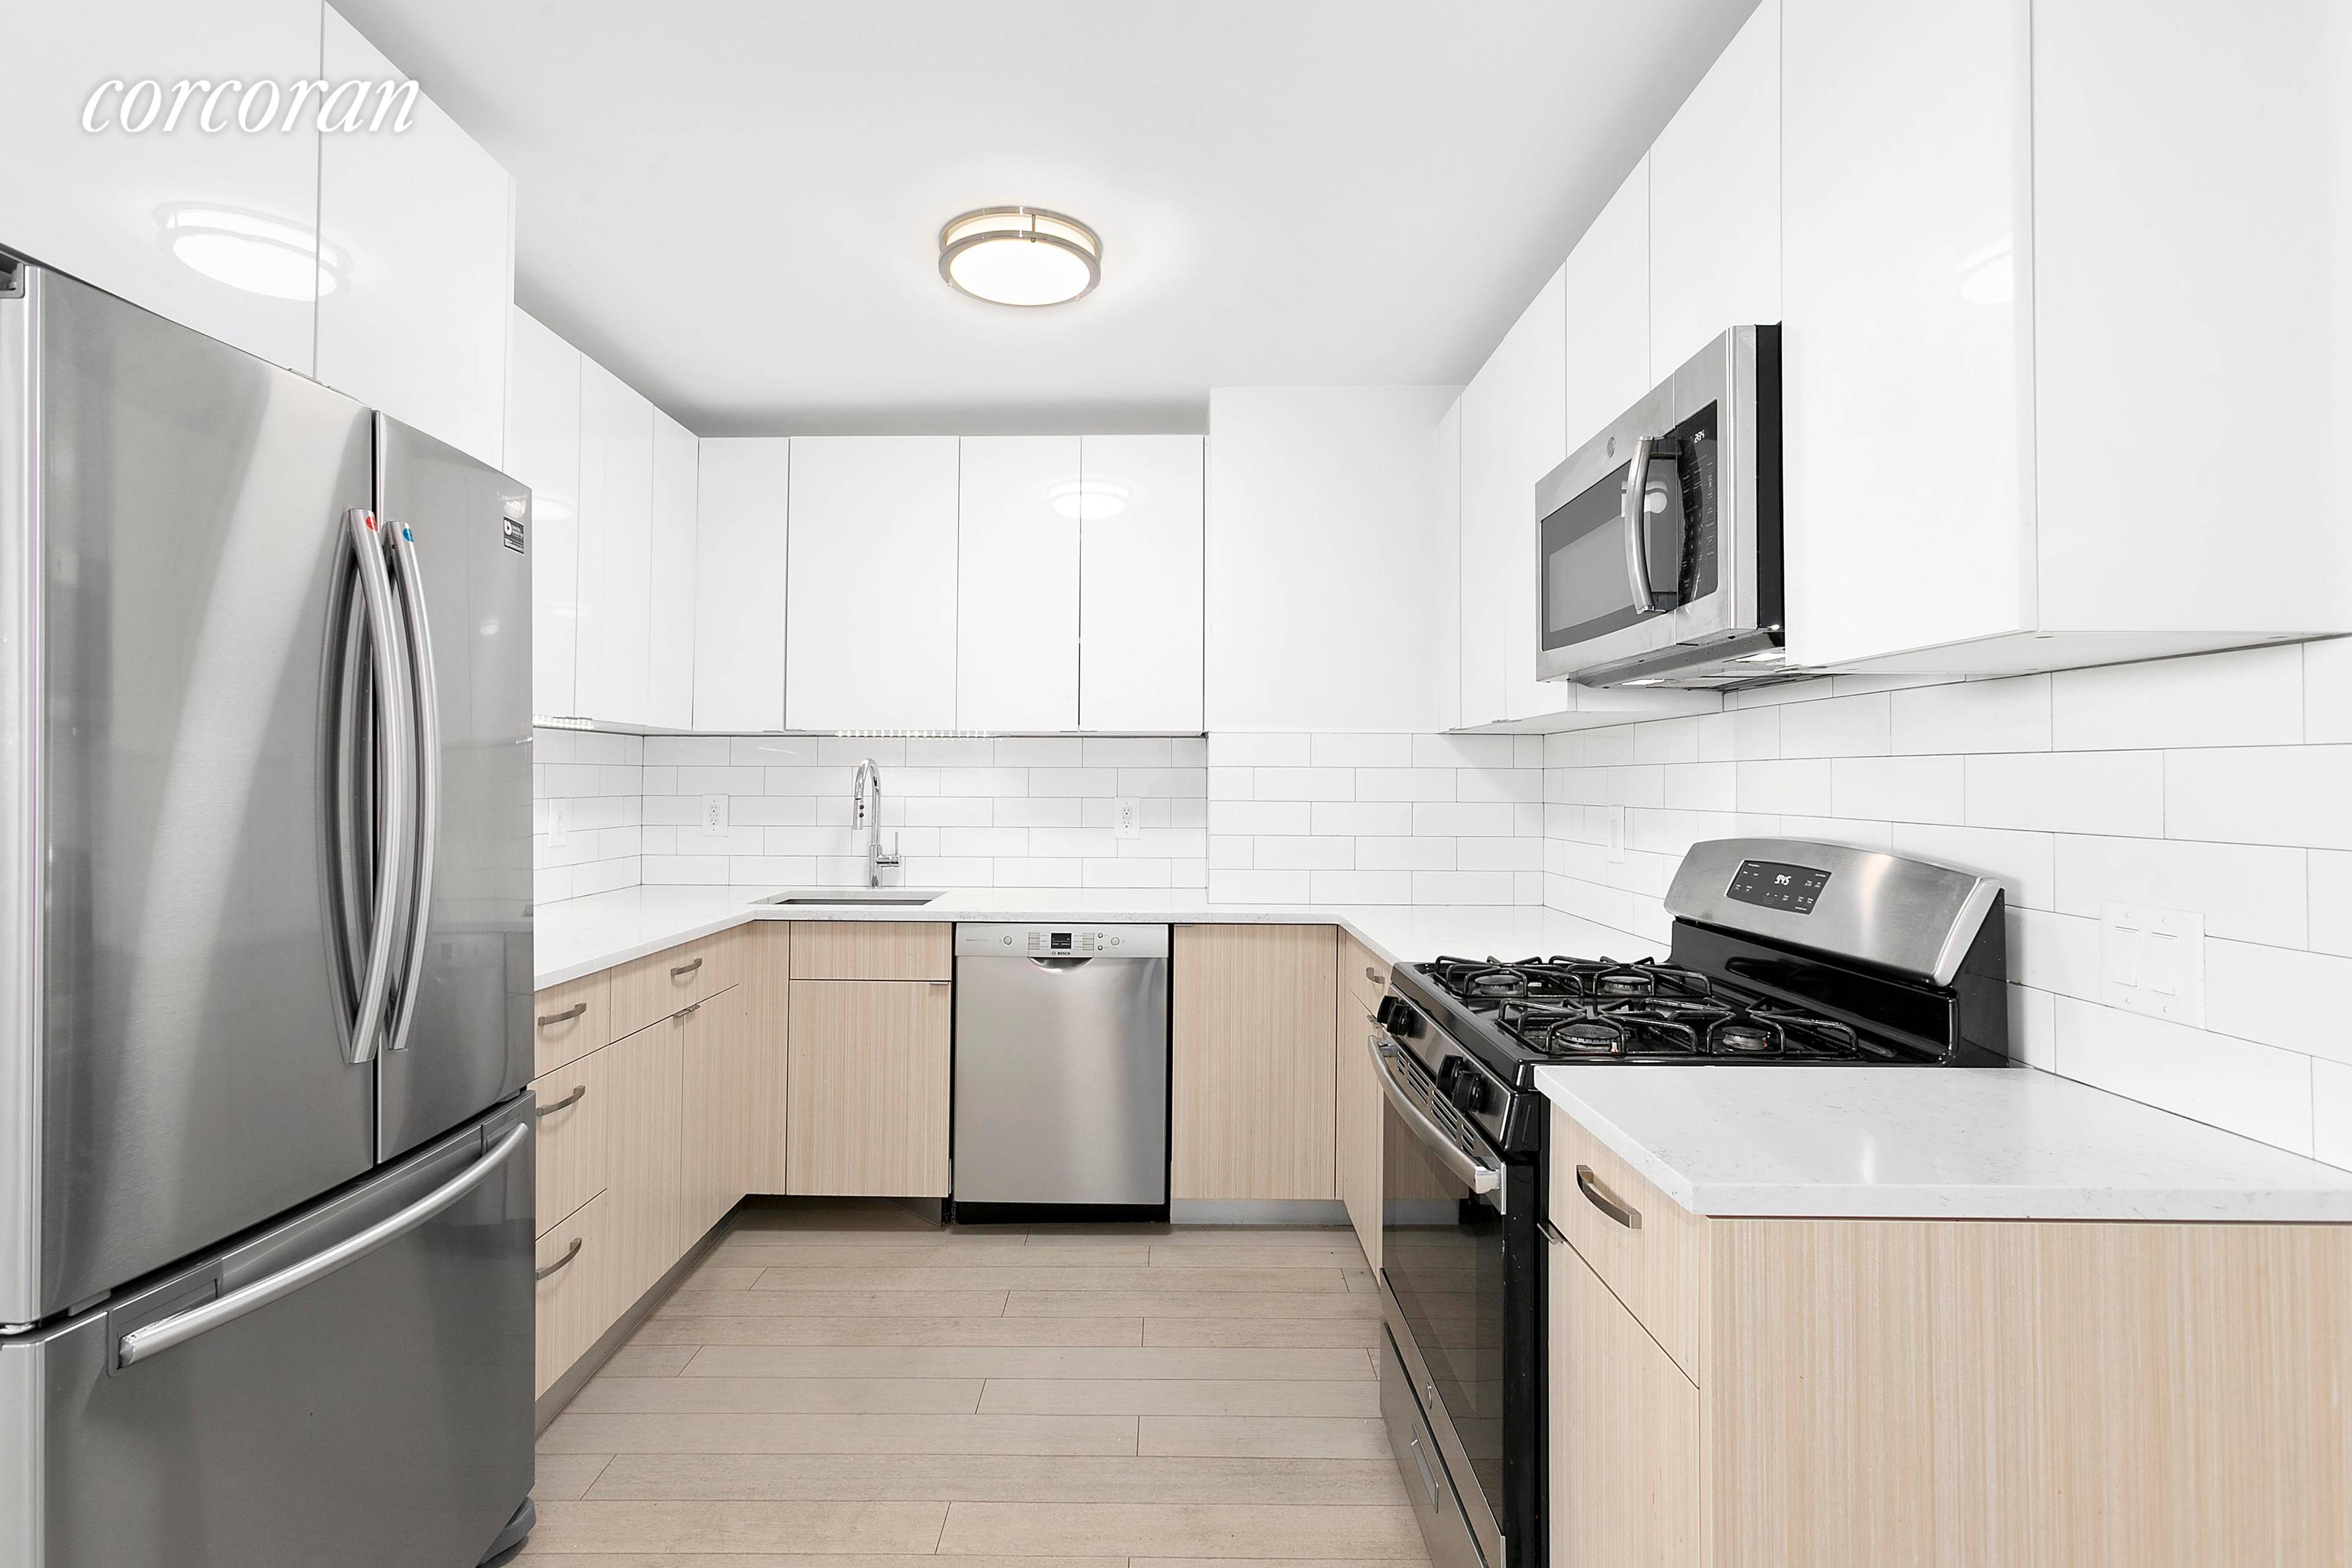 Welcome to The Drake ! NO FEE Spacious 4 bedroom 2 bathroom apartment with modern finishes in the heart of Rego Park !